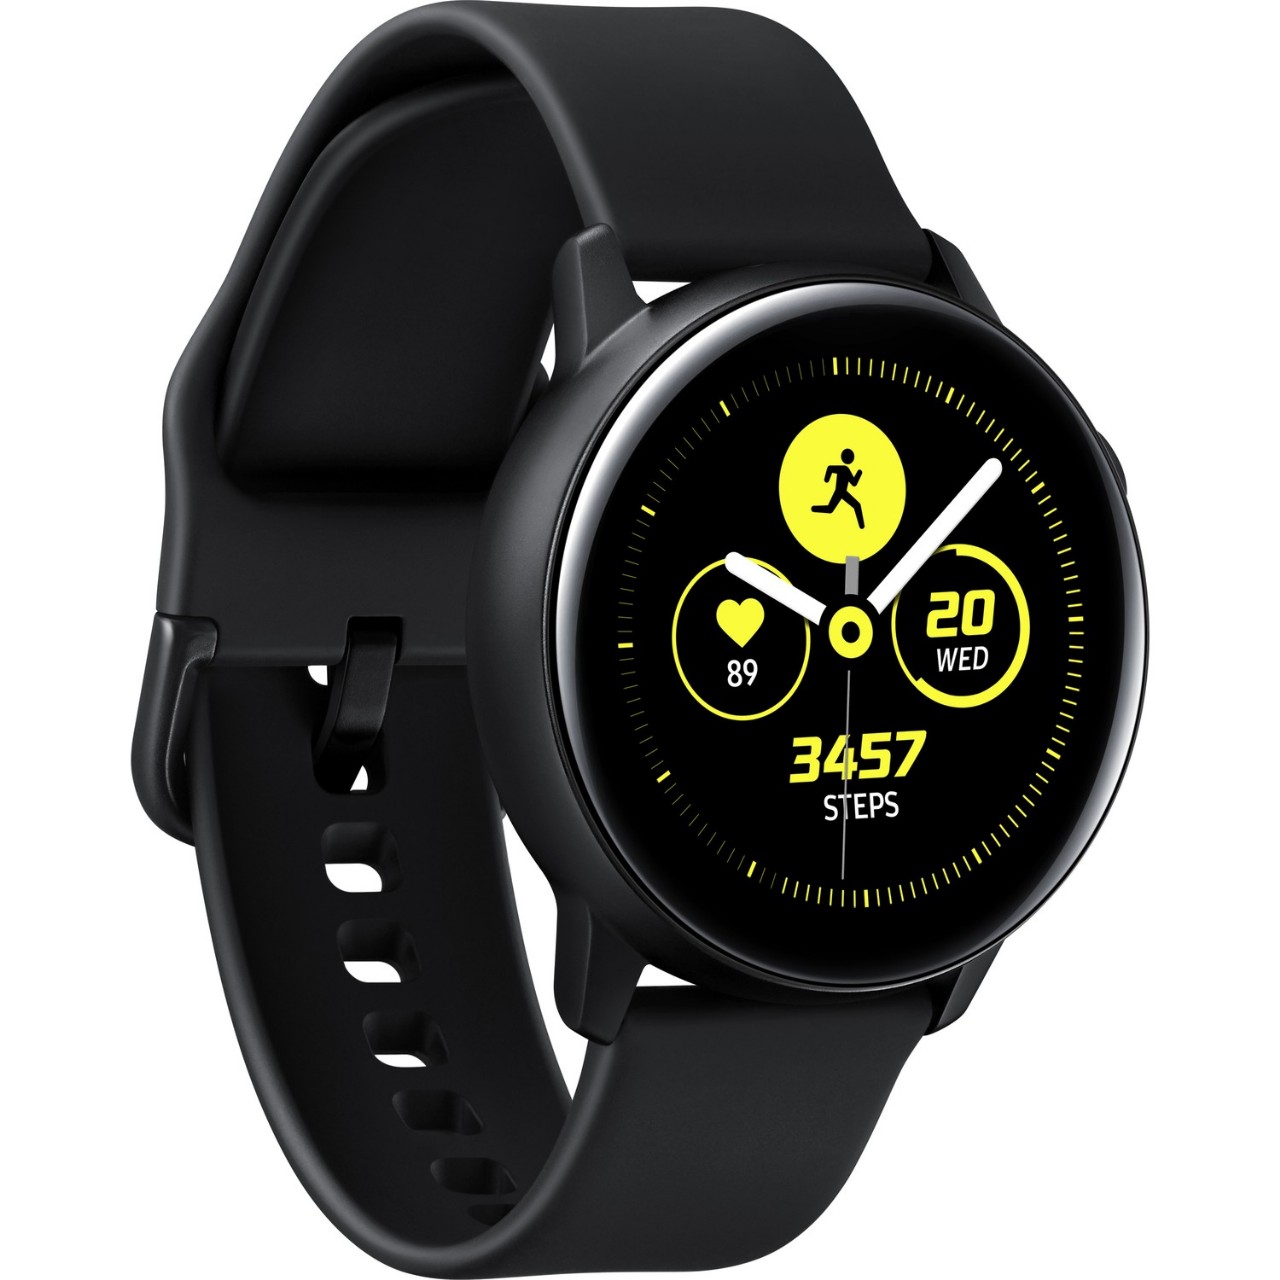 The Samsung Galaxy Watch Active battery life